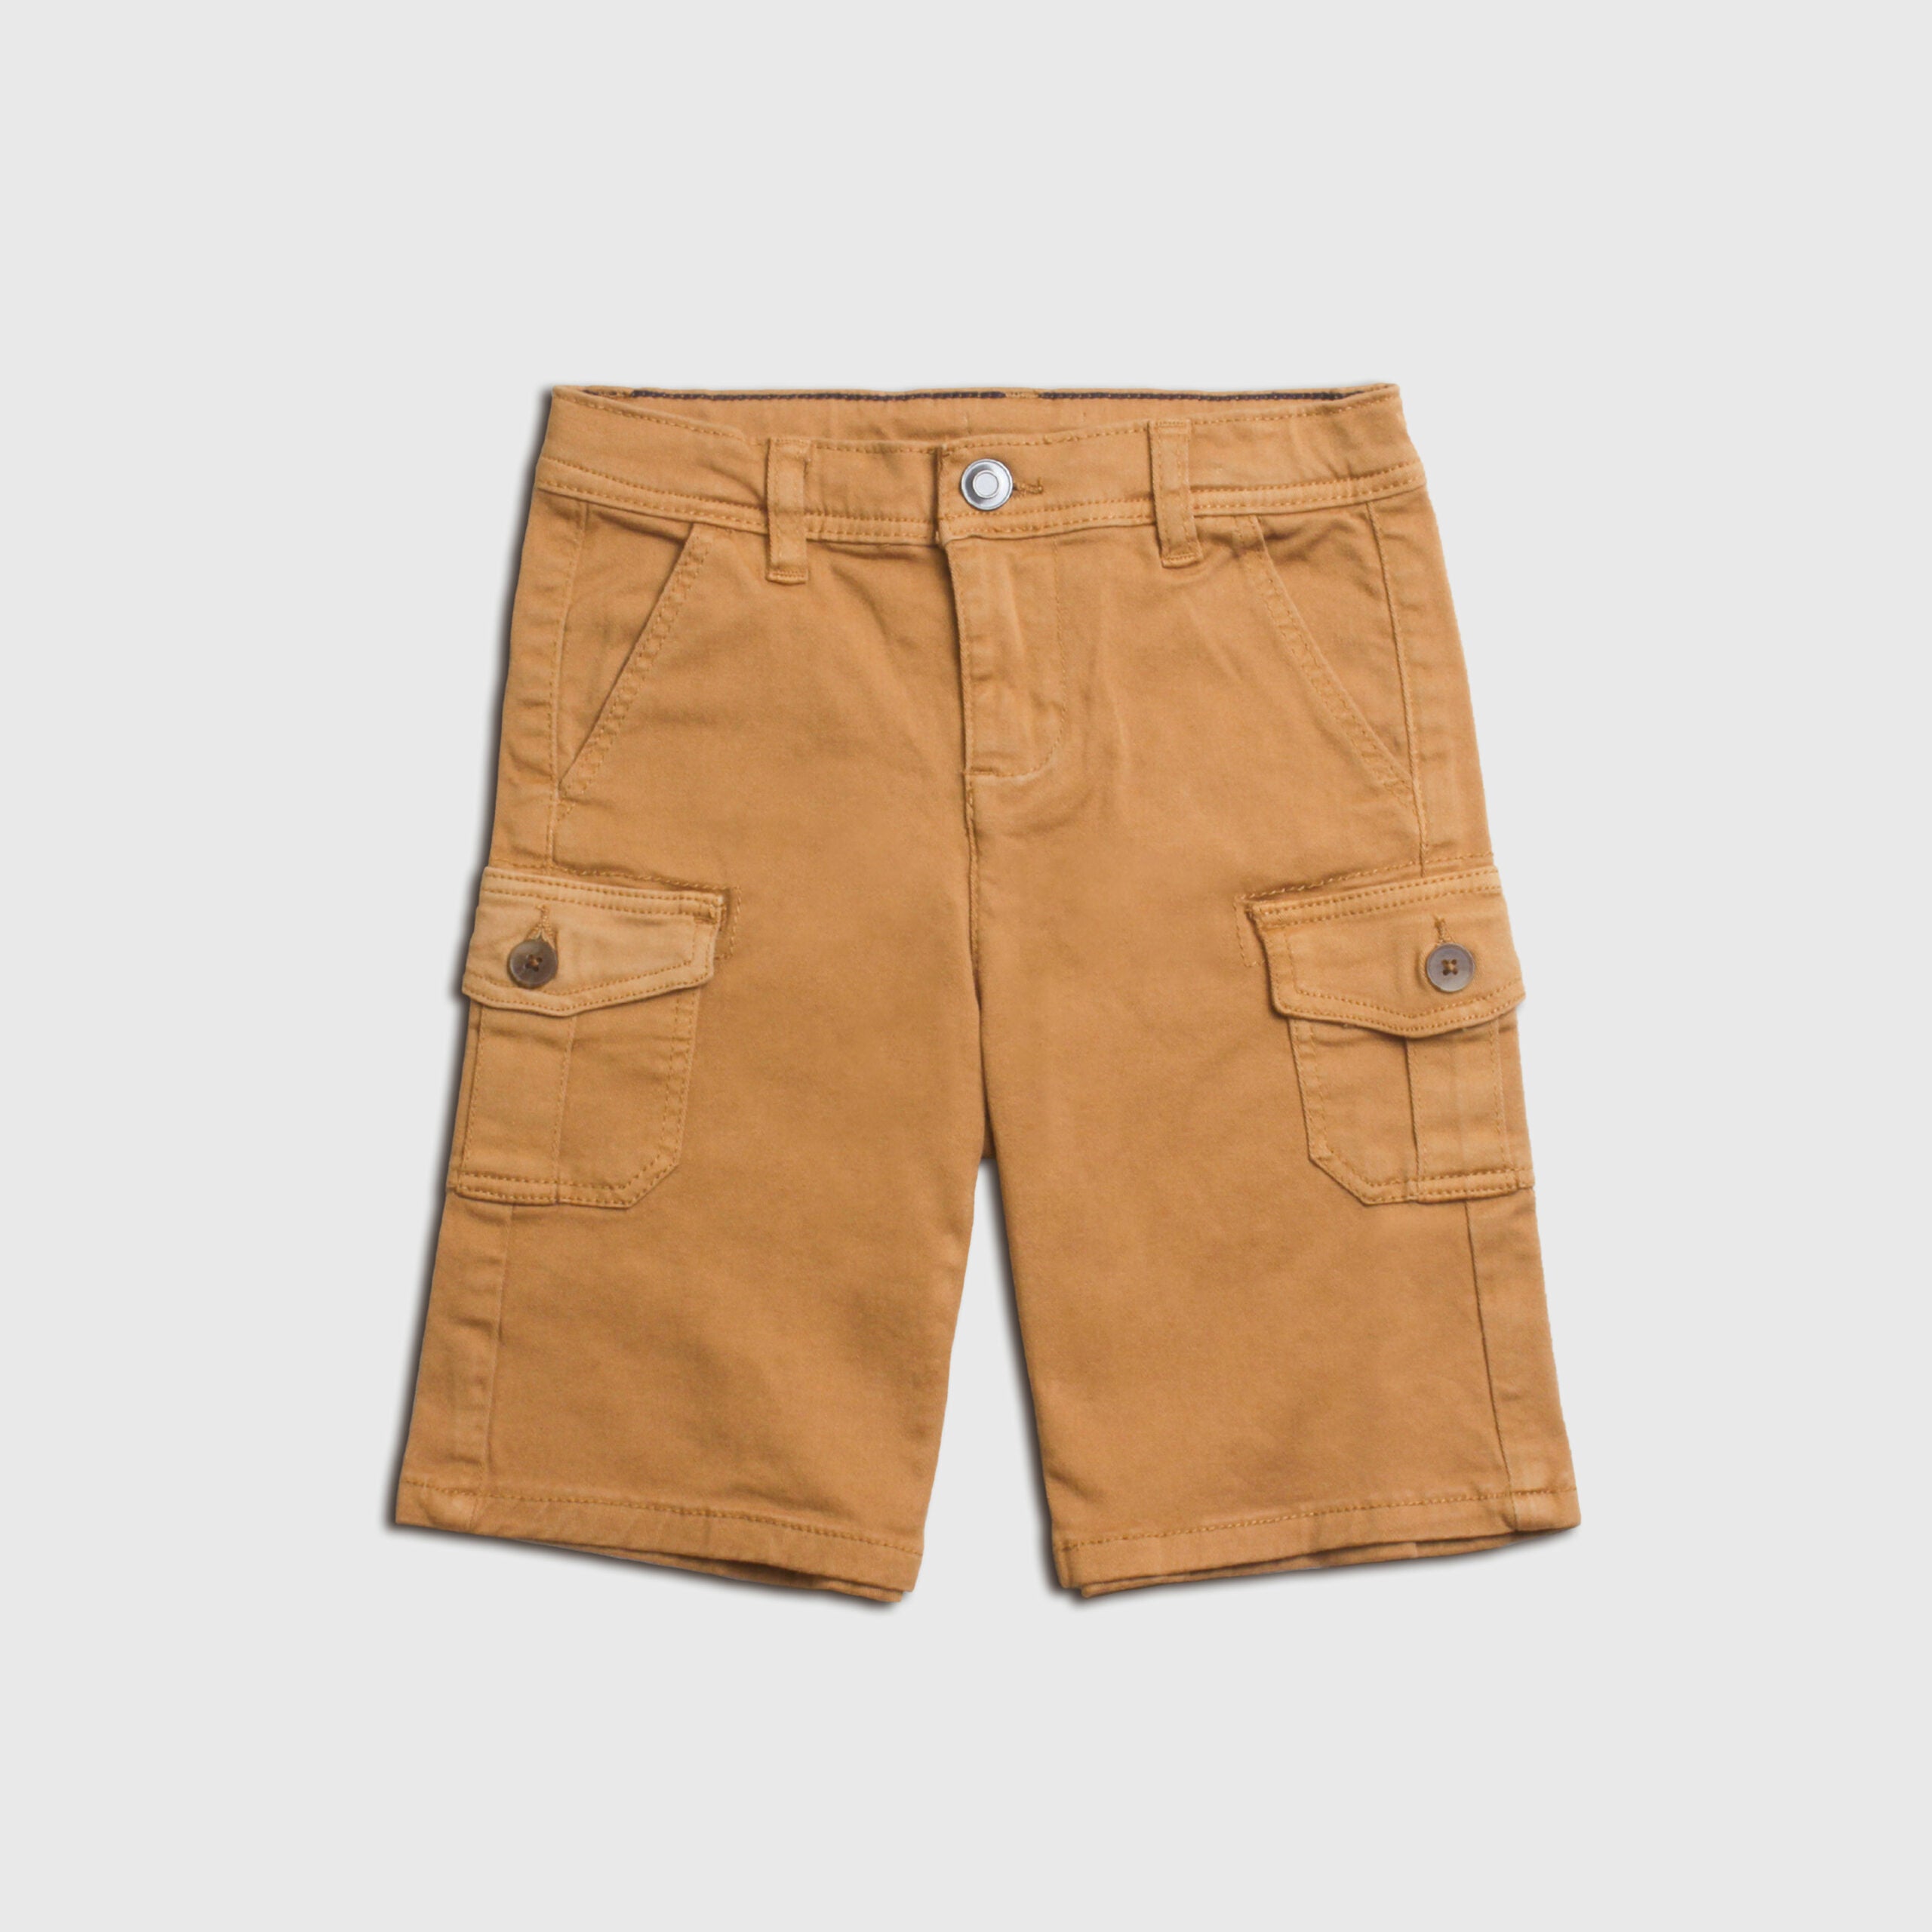 Kids Brown Shorts for Summer